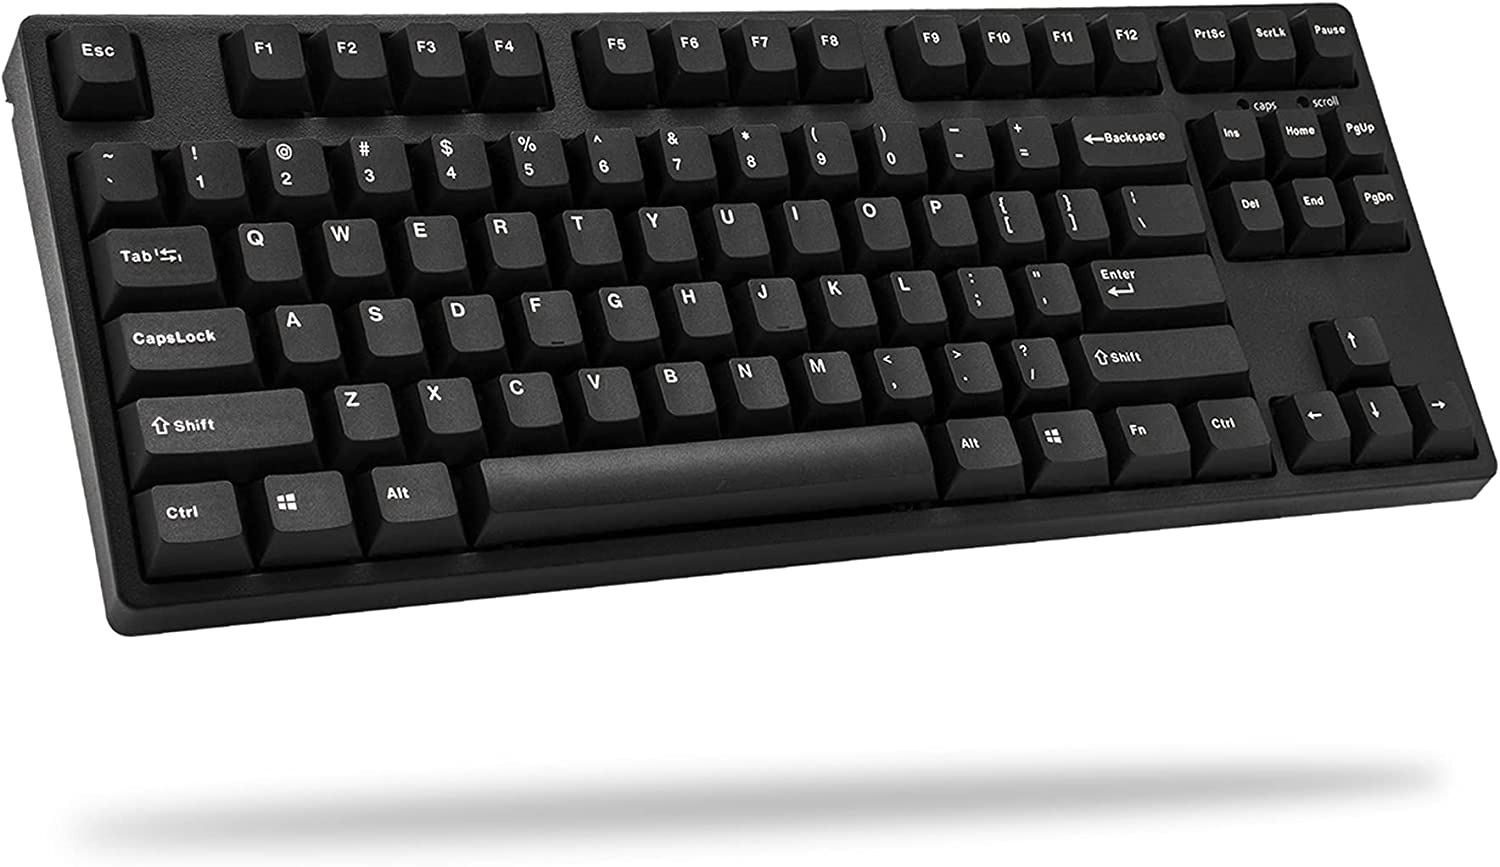 CD87 V2 Ergonomic Mechanical Keyboard with Cherry MX Clear Switch for Windows an